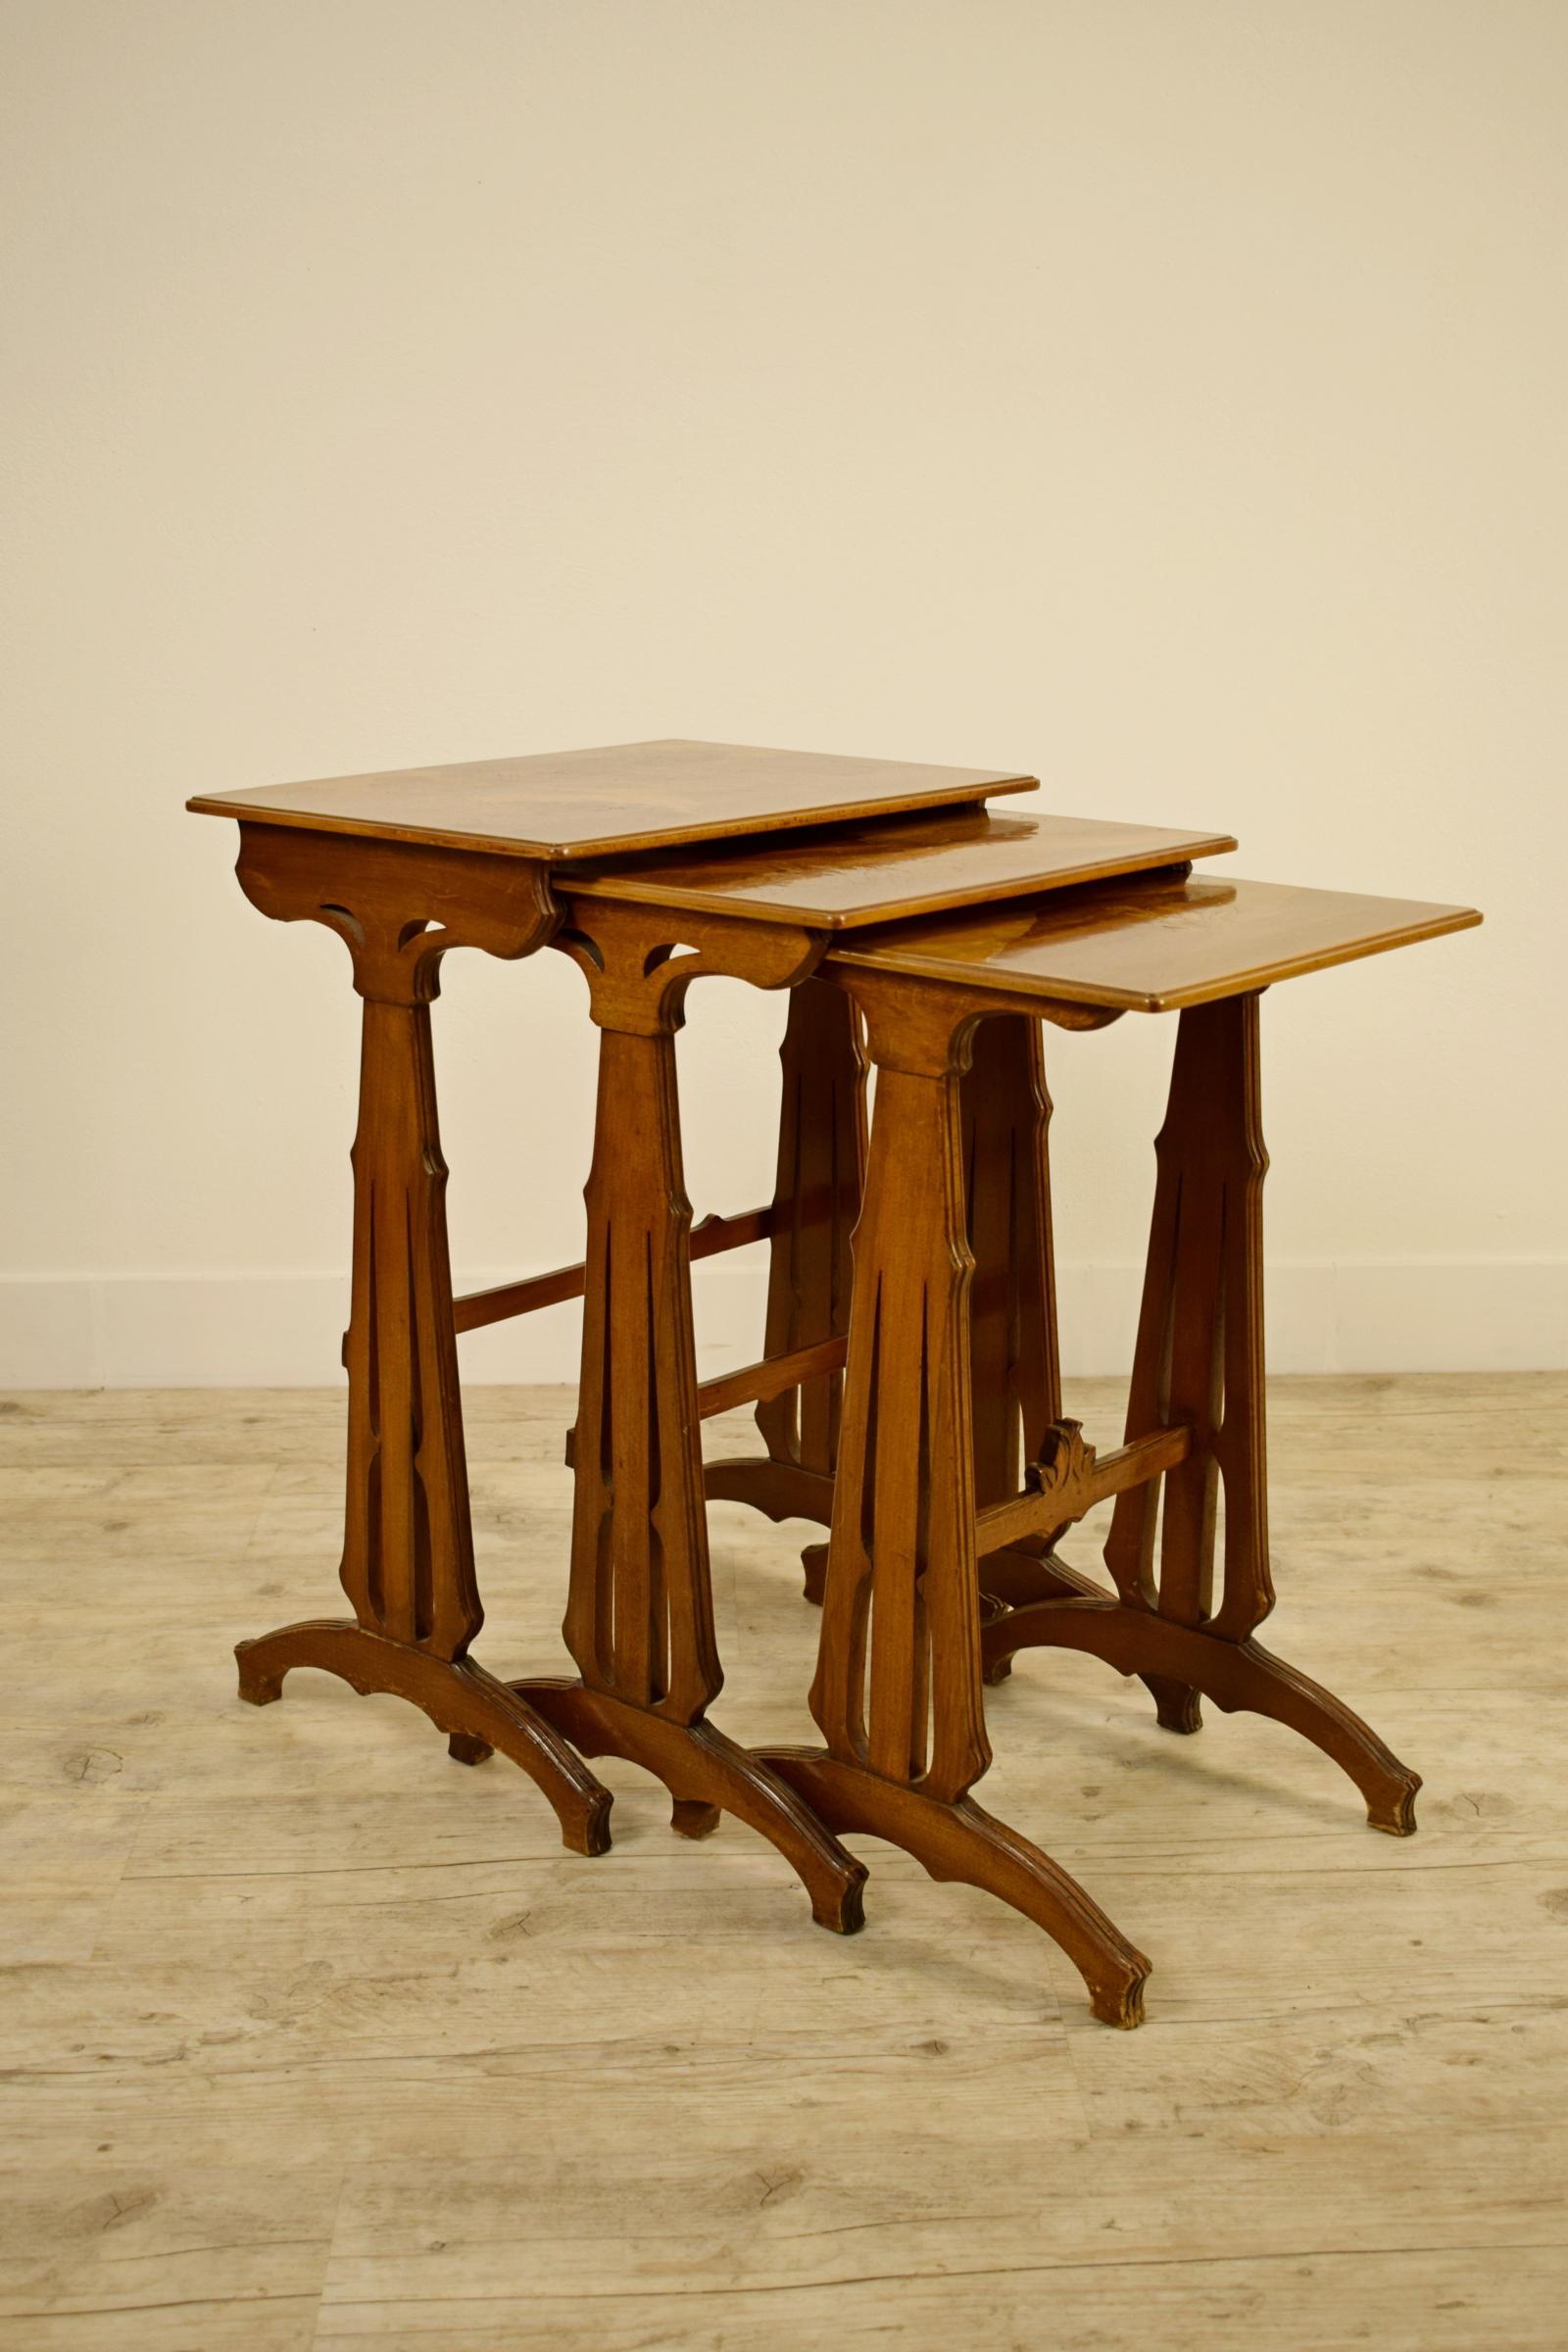 Art Nouveau 20th Century, Three French Nesting Wood Coffee Tables by Emile Gallè, 1846-1904